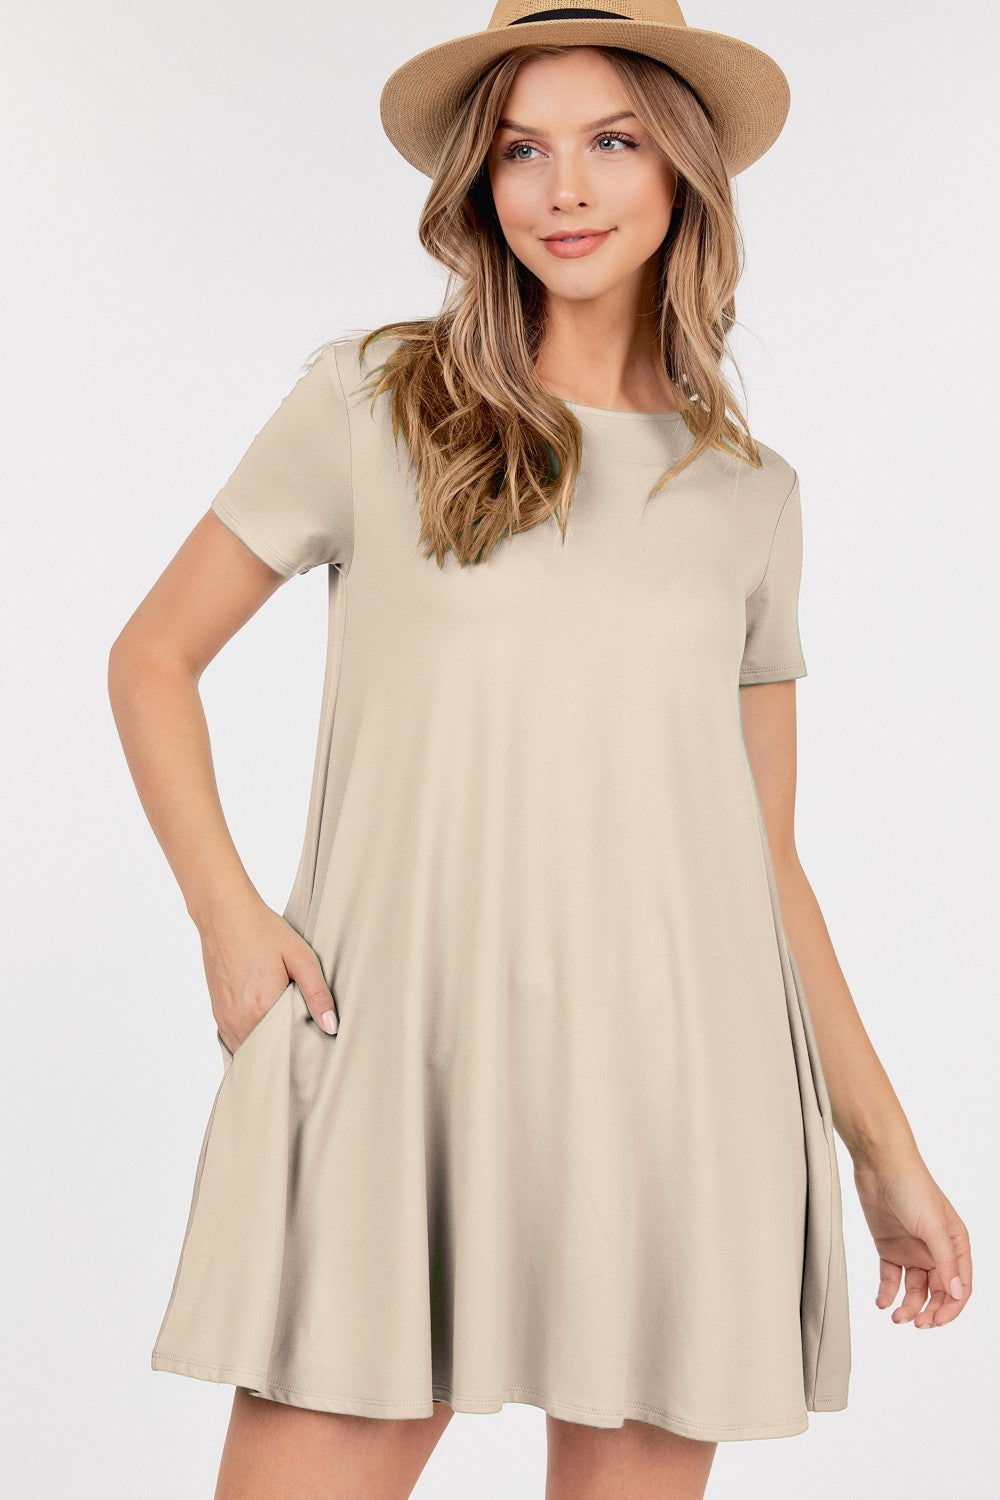 Pocketed Tunic Top